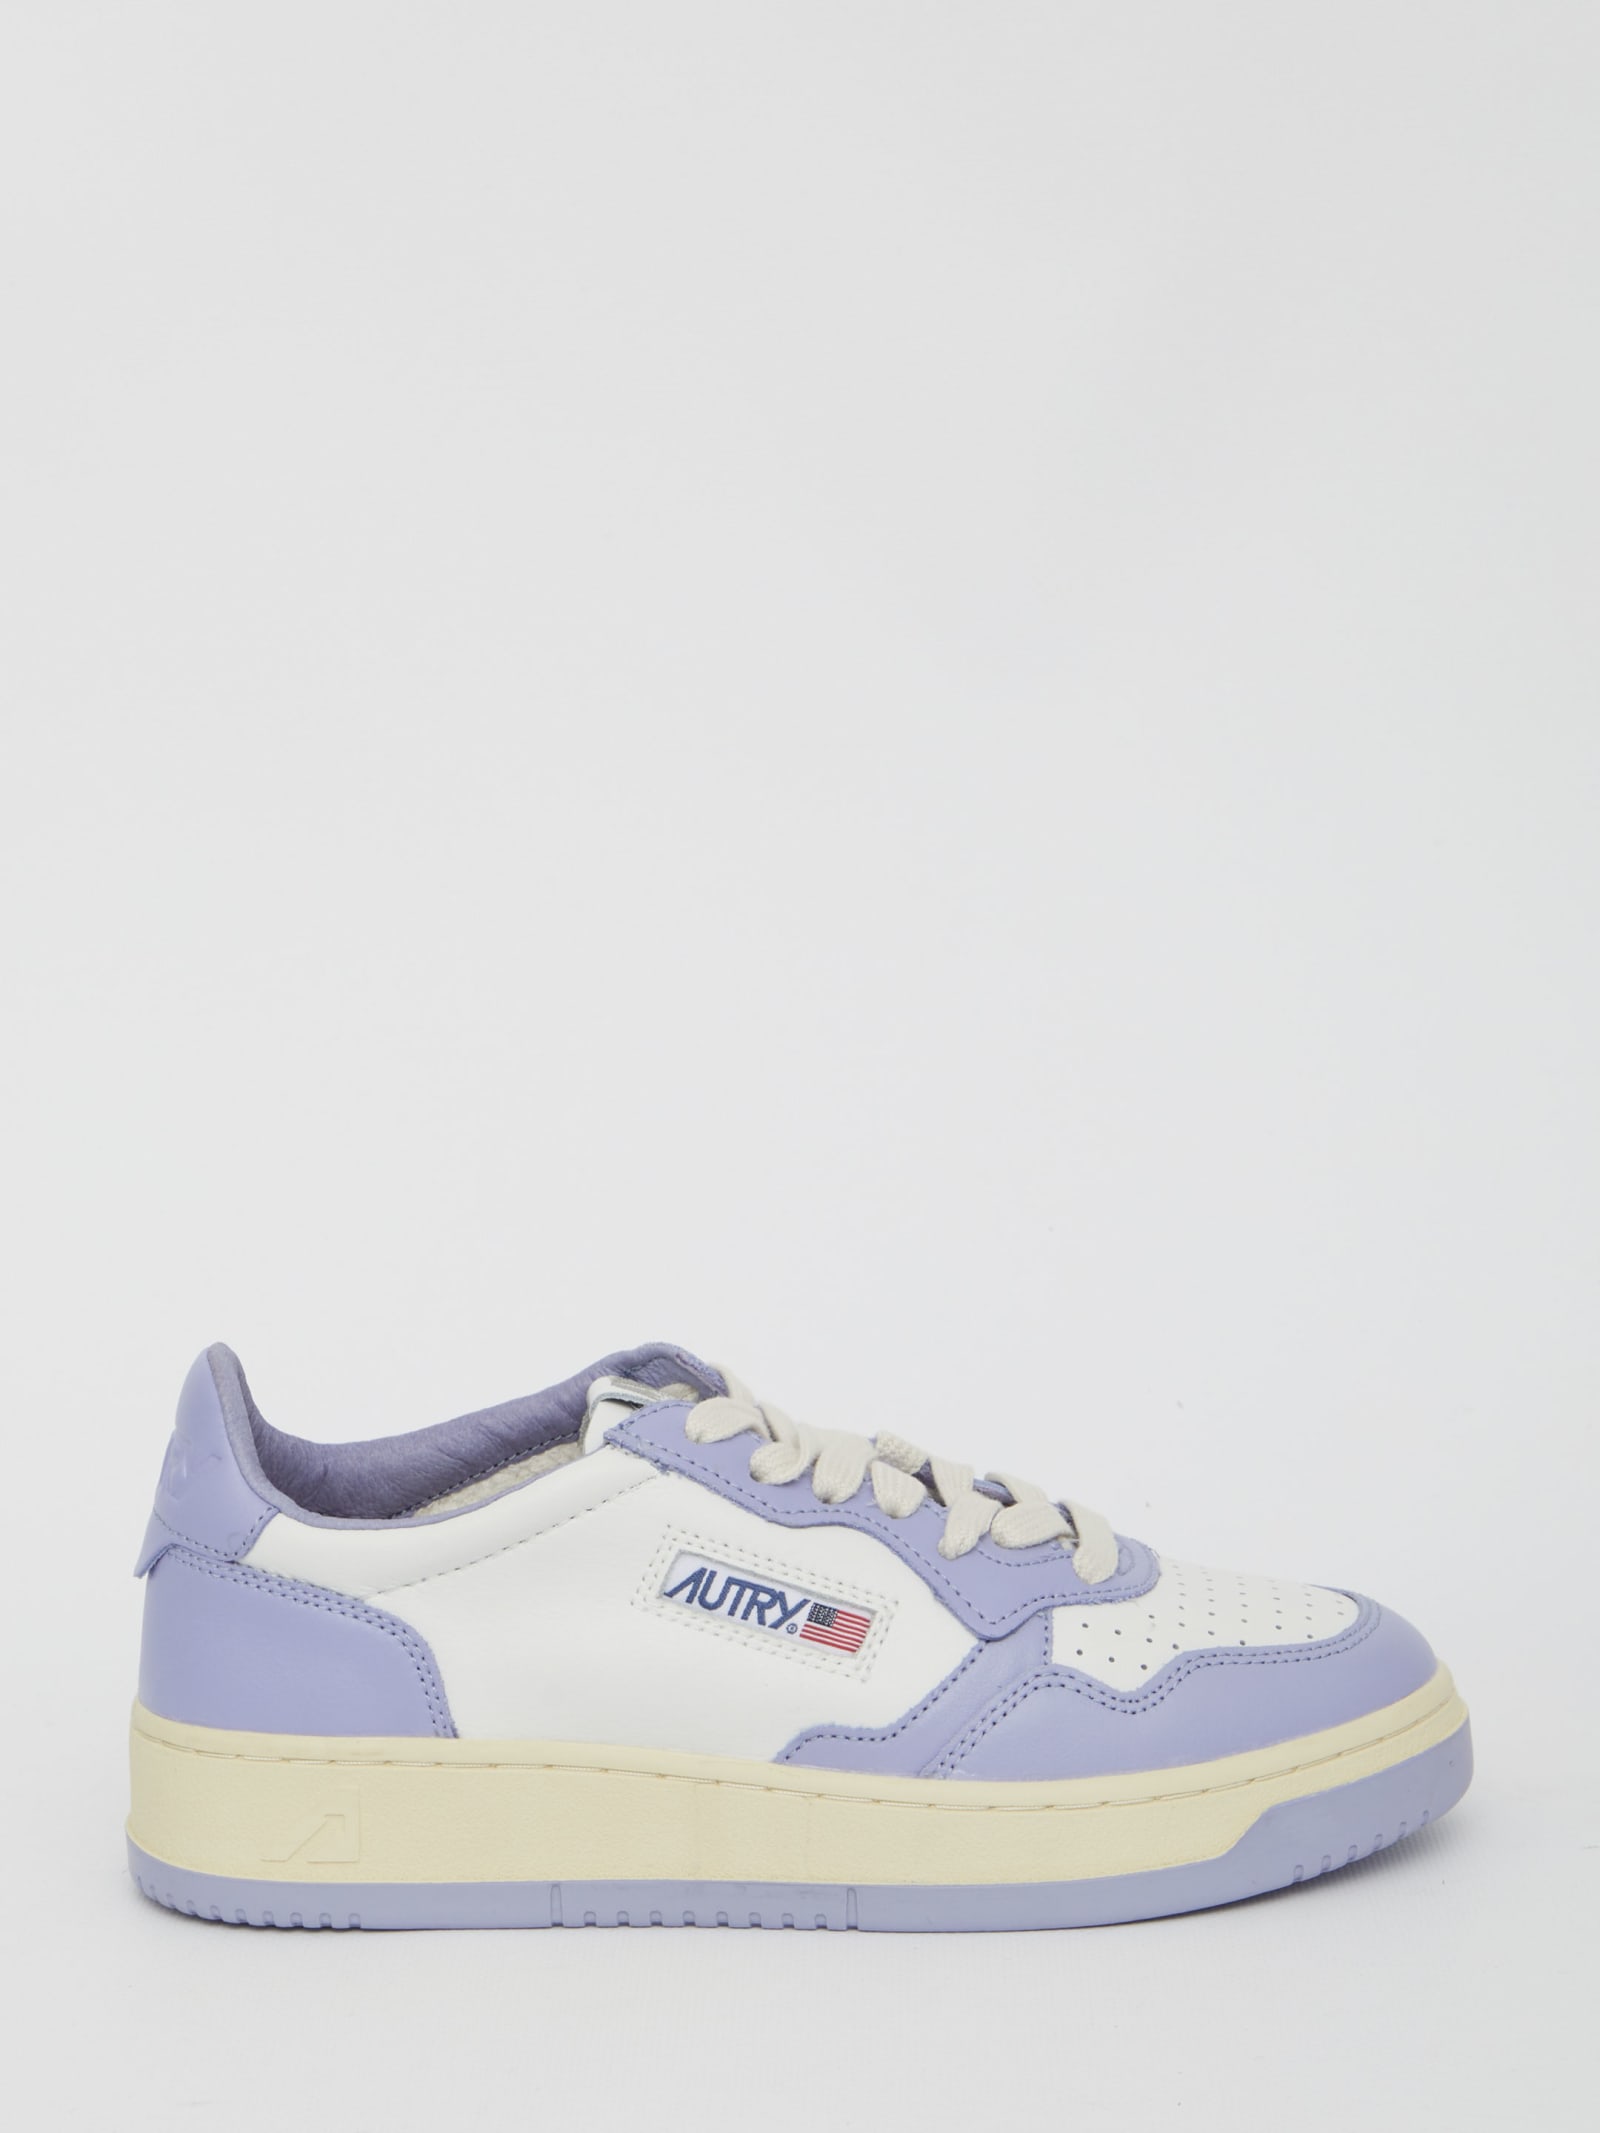 AUTRY MEDALIST LILAC AND WHITE SNEAKERS